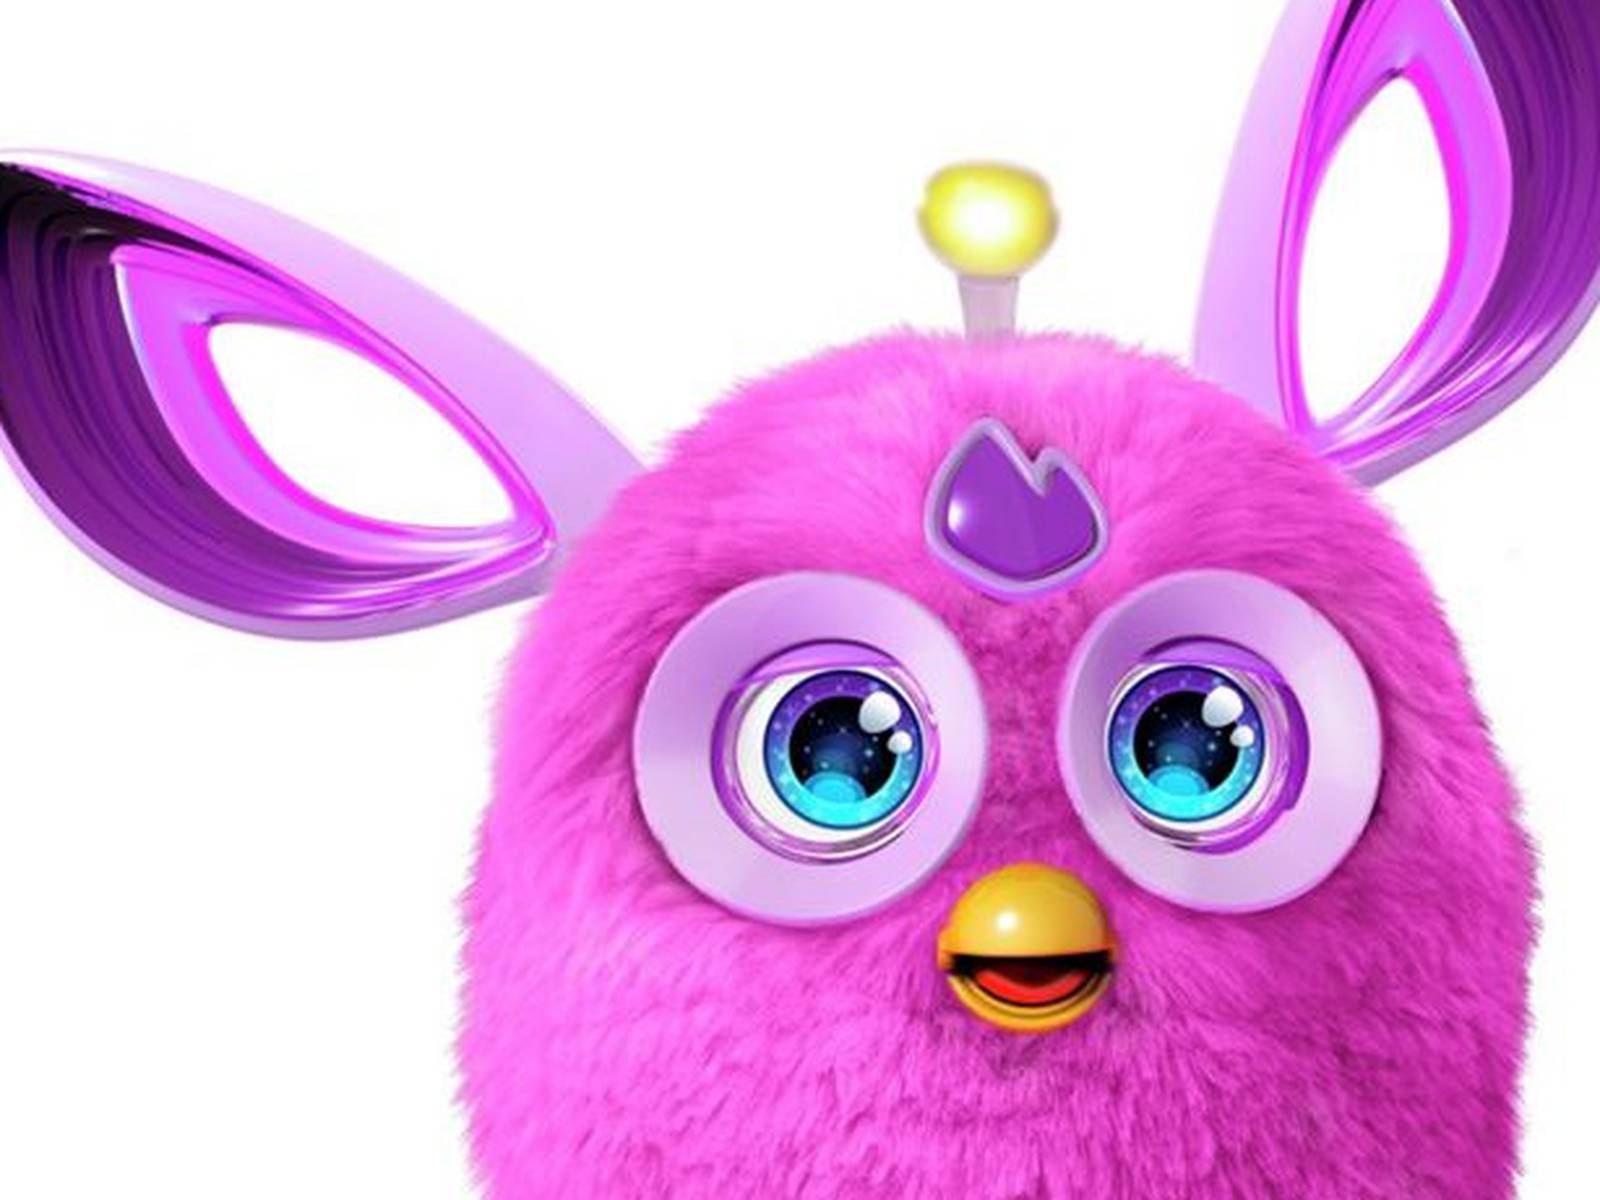 Hasbro Furby Connect review: Meet Furby Connect: Always-connected